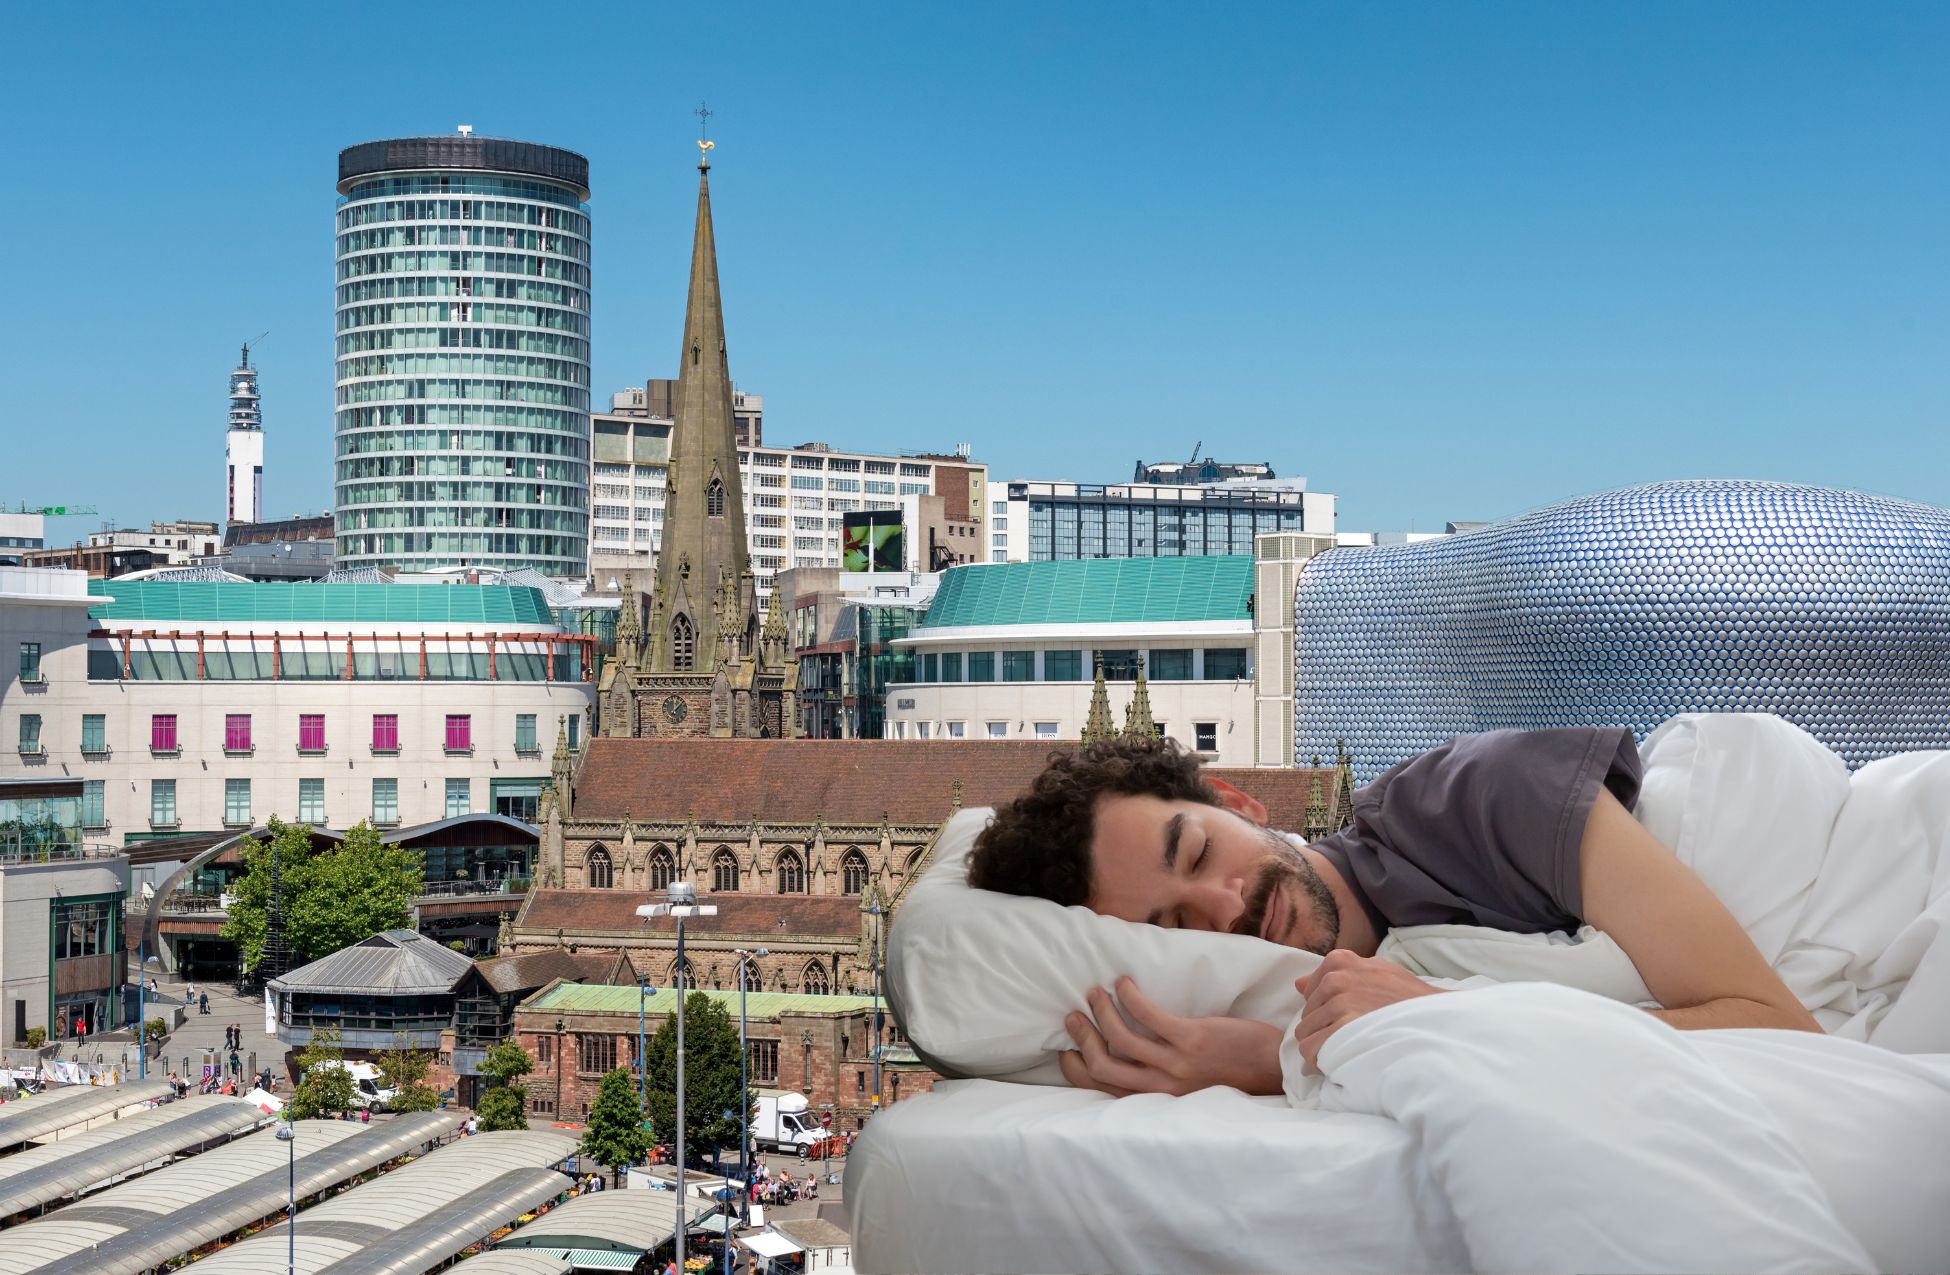 Best Hotels In Birmingham: Unbeatable Spots for A Brummie Chuckle